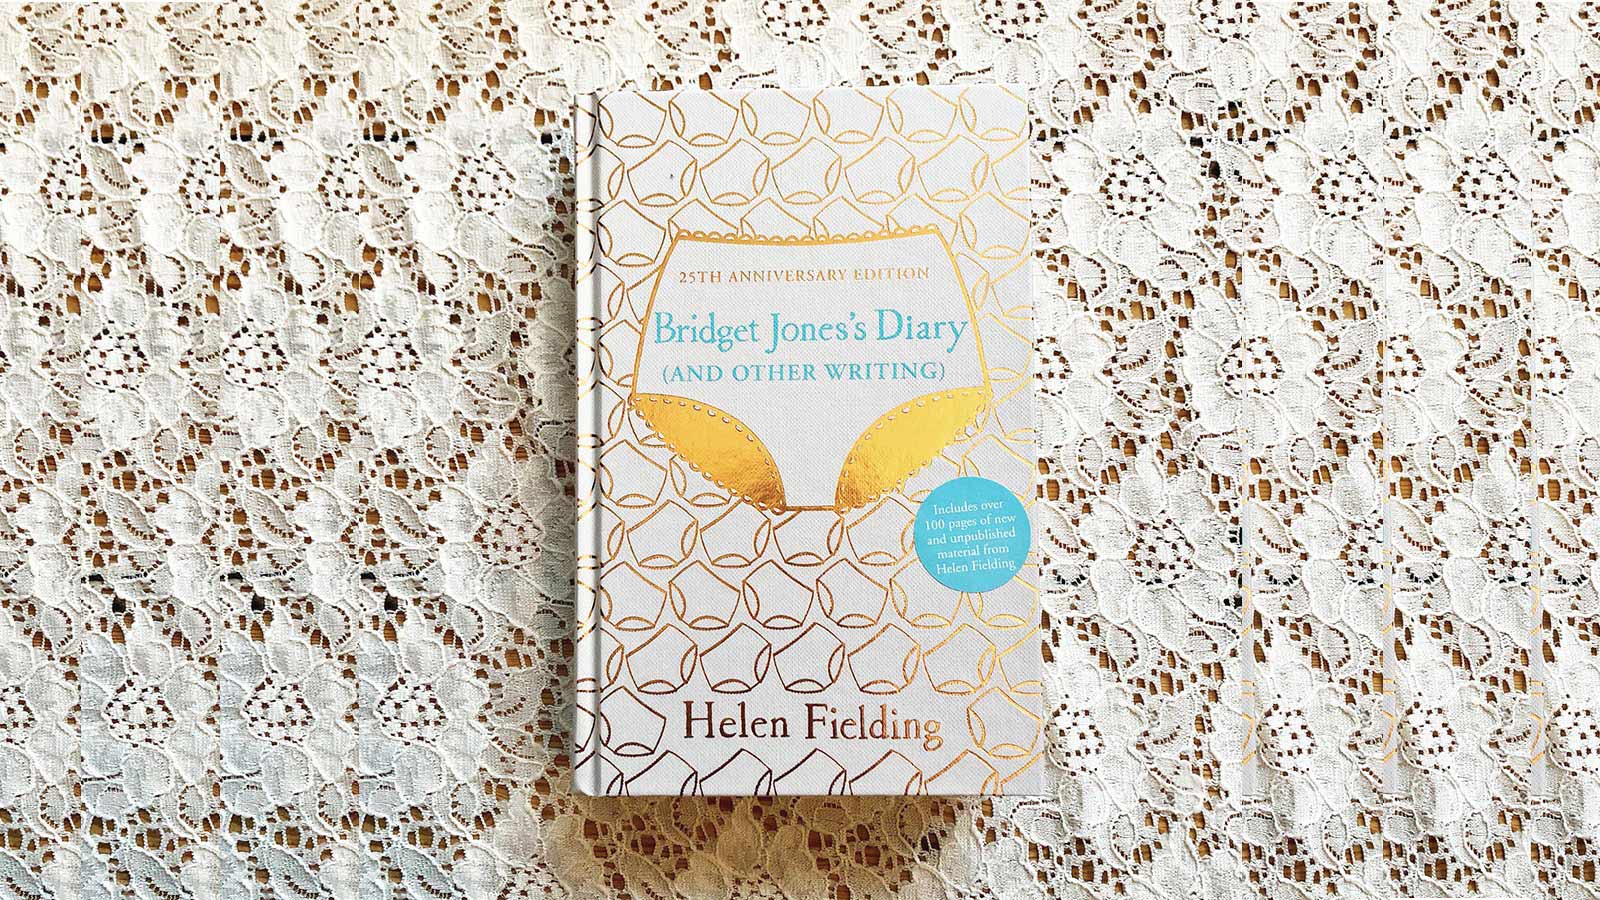 The book cover of Bridget Jones's Diary against a white lace background